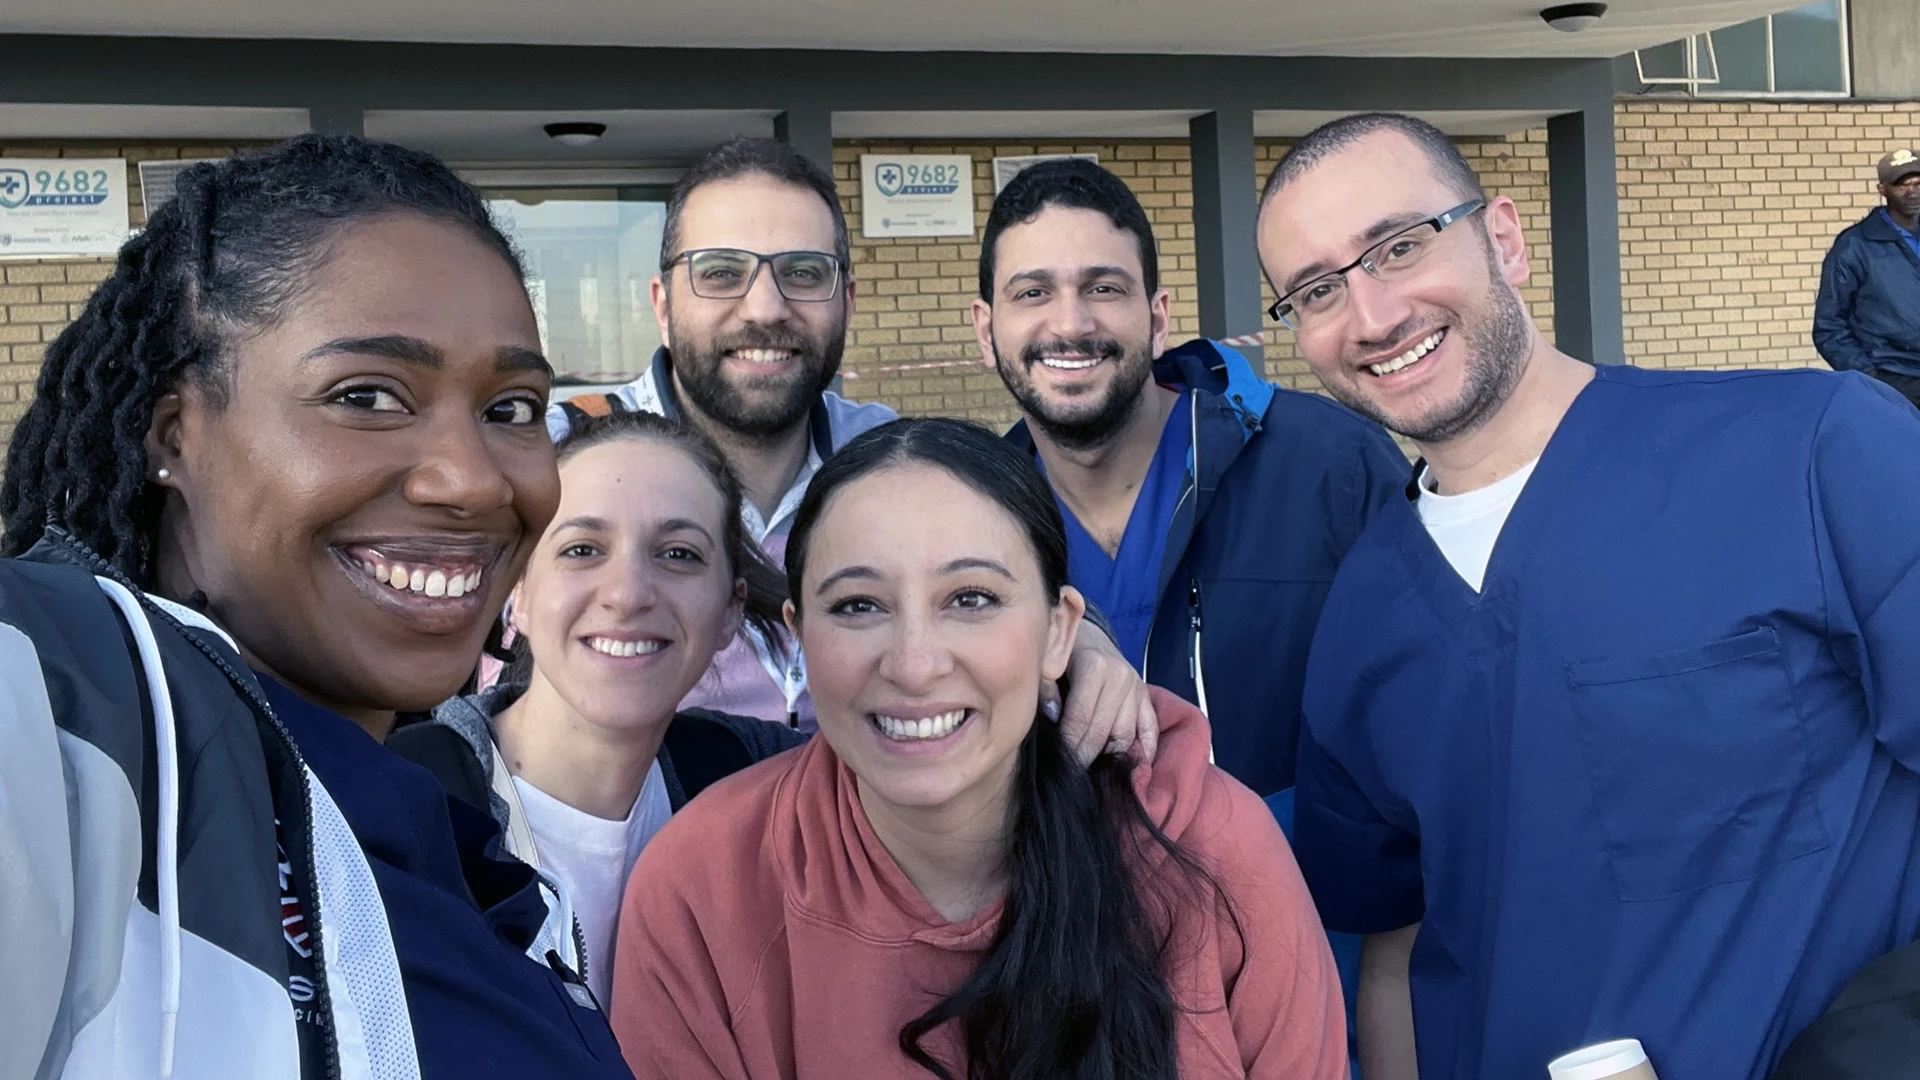 Dr. Zakhary (center) and Dr. Louissaint (left) also worked with clinicians in other specialties around the world during the trip, including a physical therapist, primary care sports doctor, plastic surgeon, and an anesthesiologist.